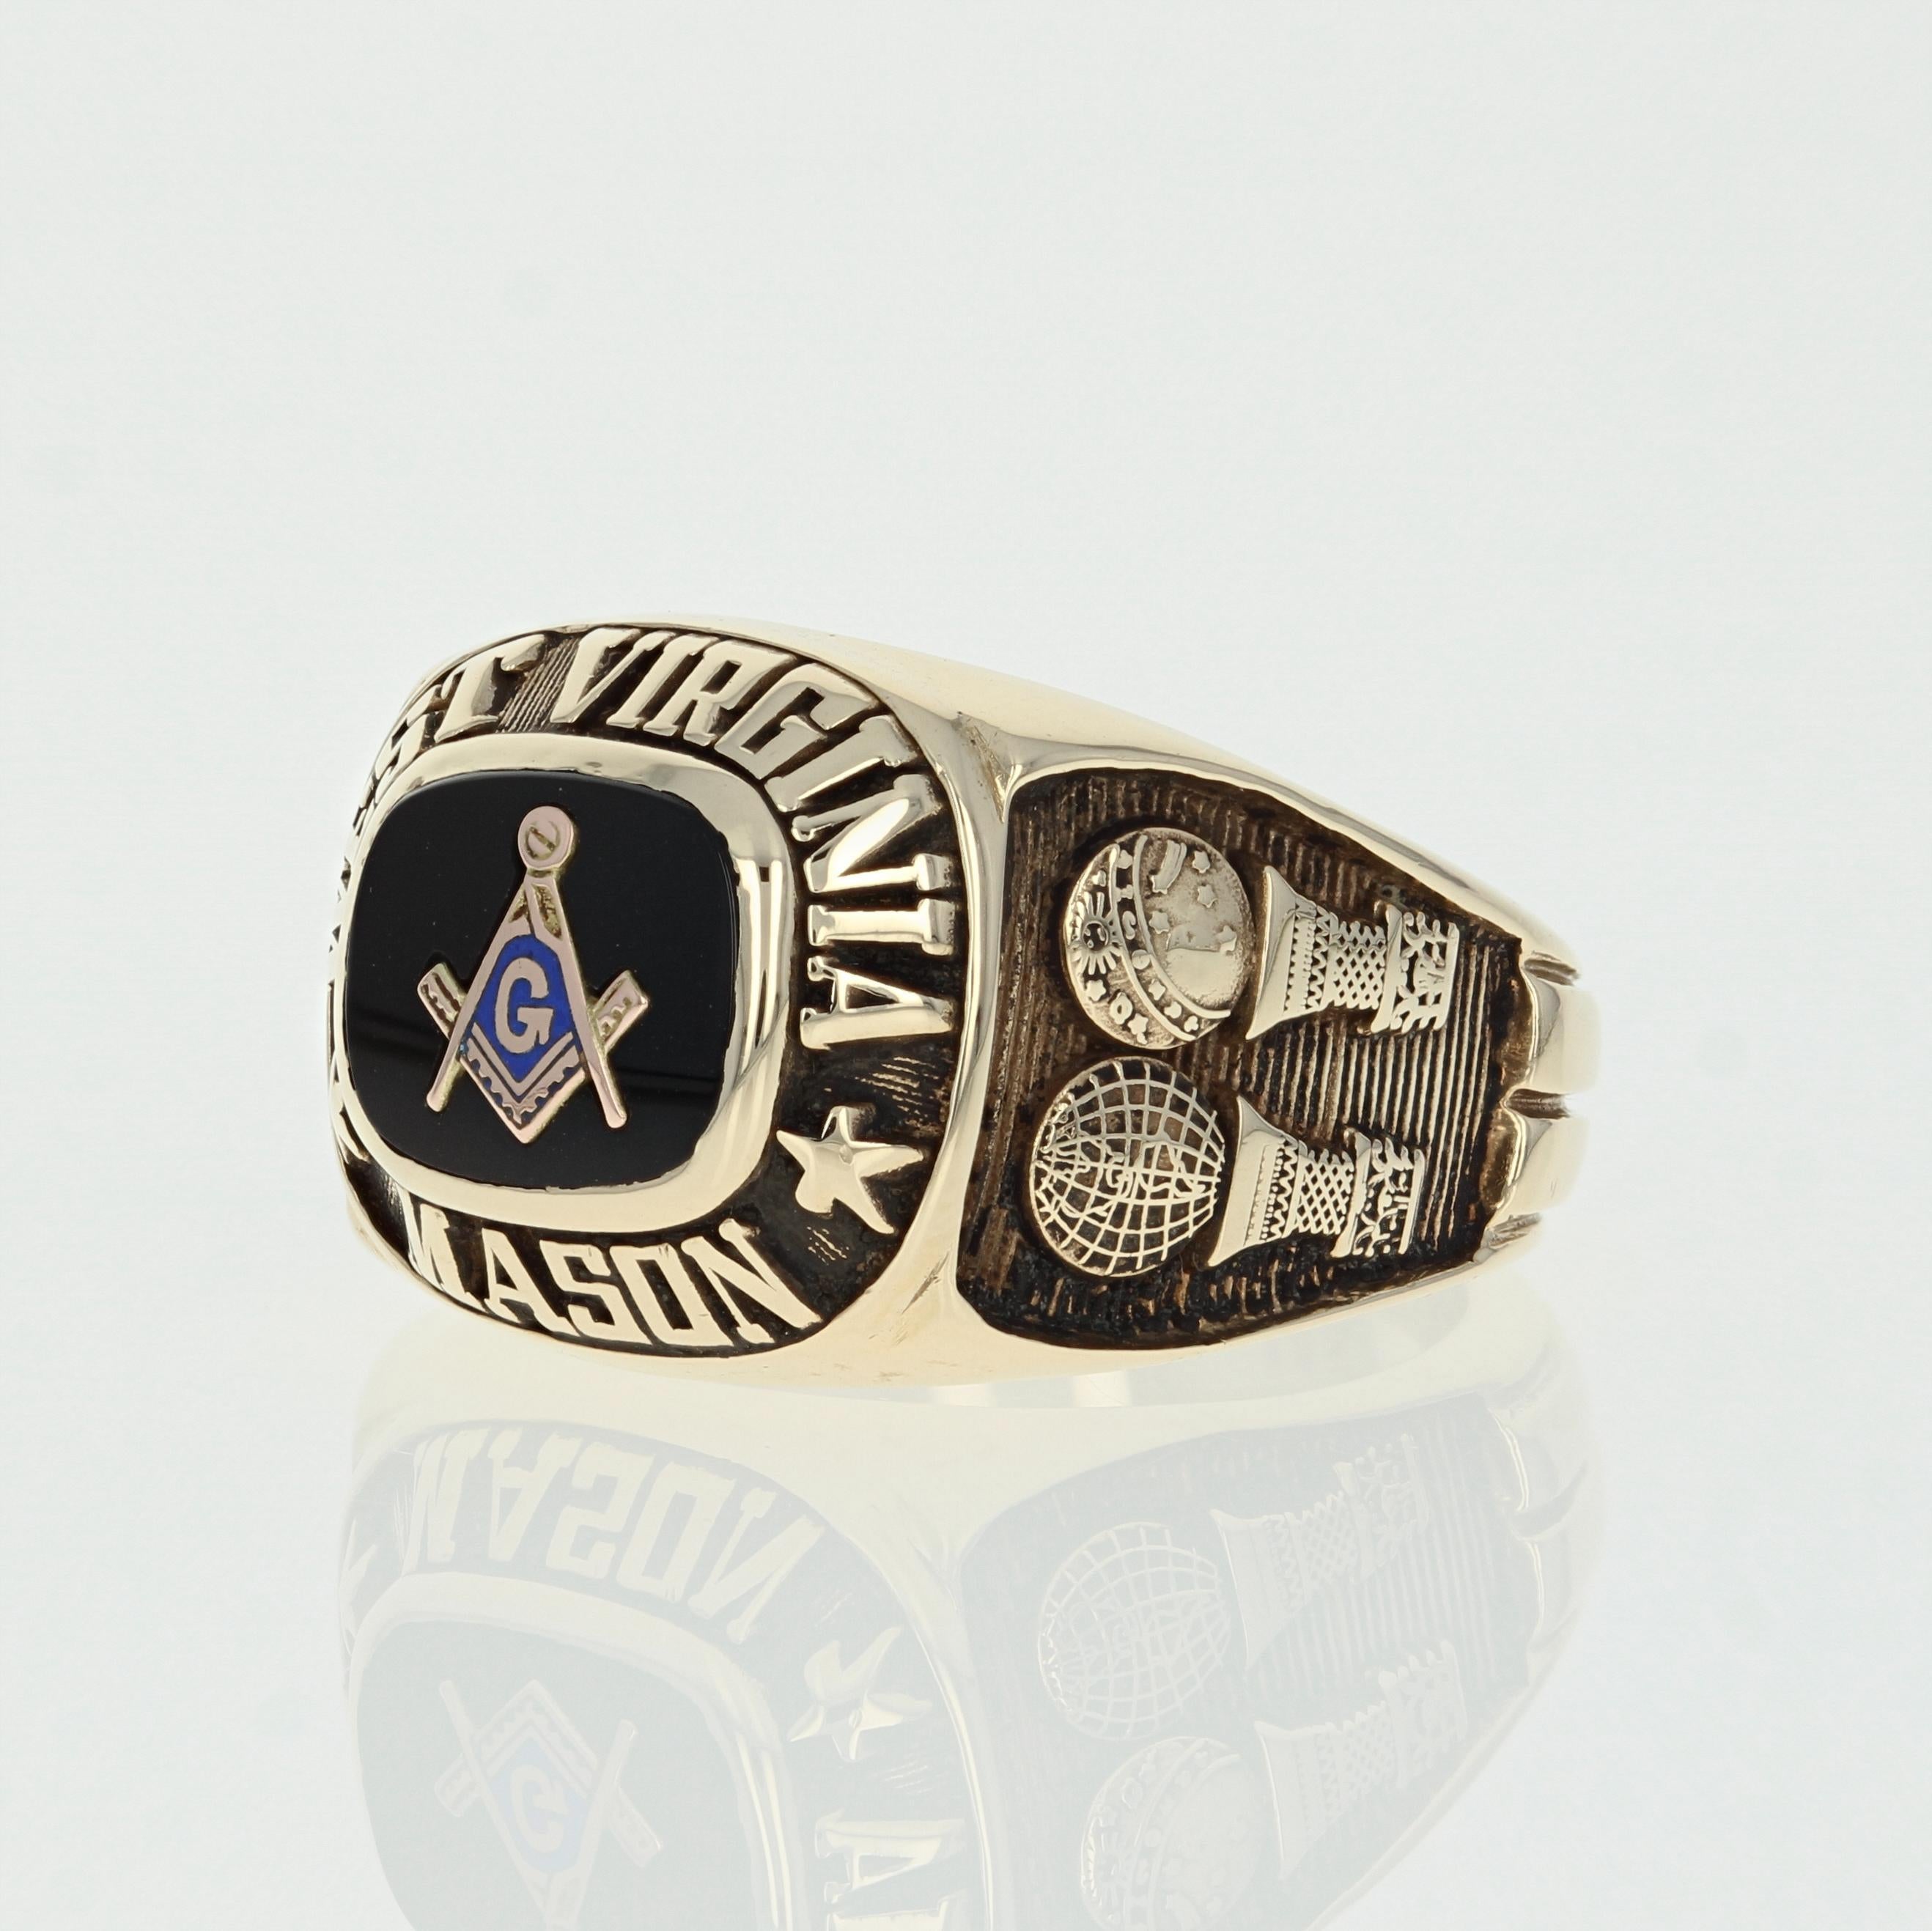 This fine Blue Lodge Master Mason ring will be an exceptional acquisition for your collection of masonic memorabilia! Composed of 10k yellow gold, this piece showcases a blue-enameled 10k rose gold square and compass emblem set atop a genuine black